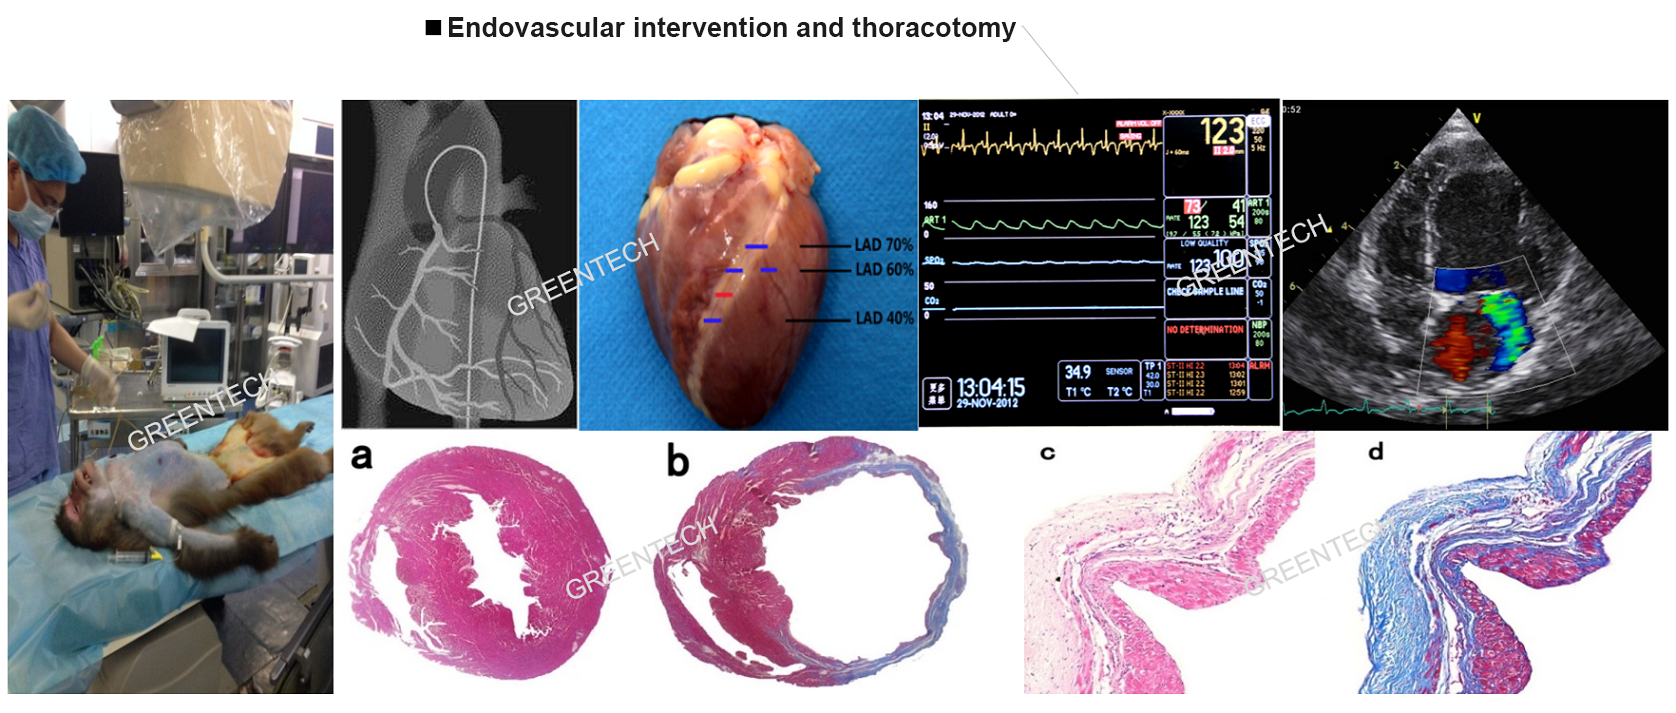 Endovascular intervention and thoracotomy.png